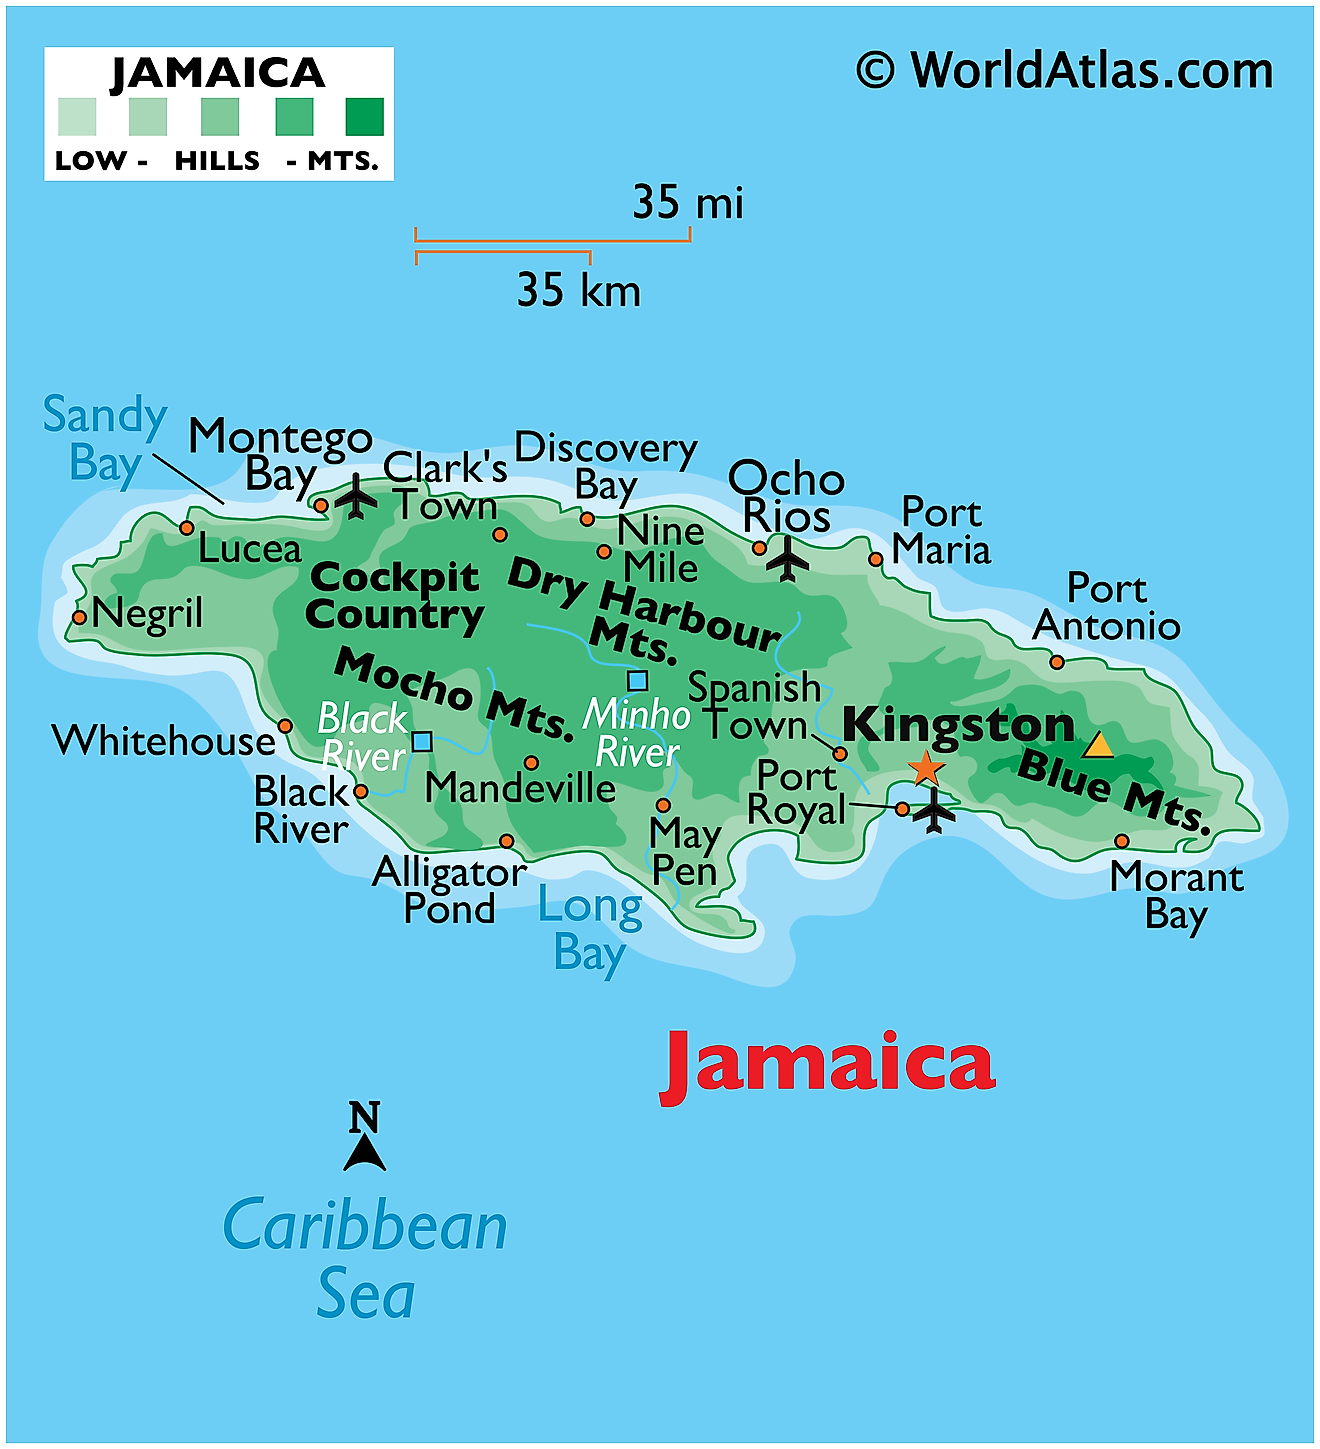 Jamaica Maps And Facts World Atlas